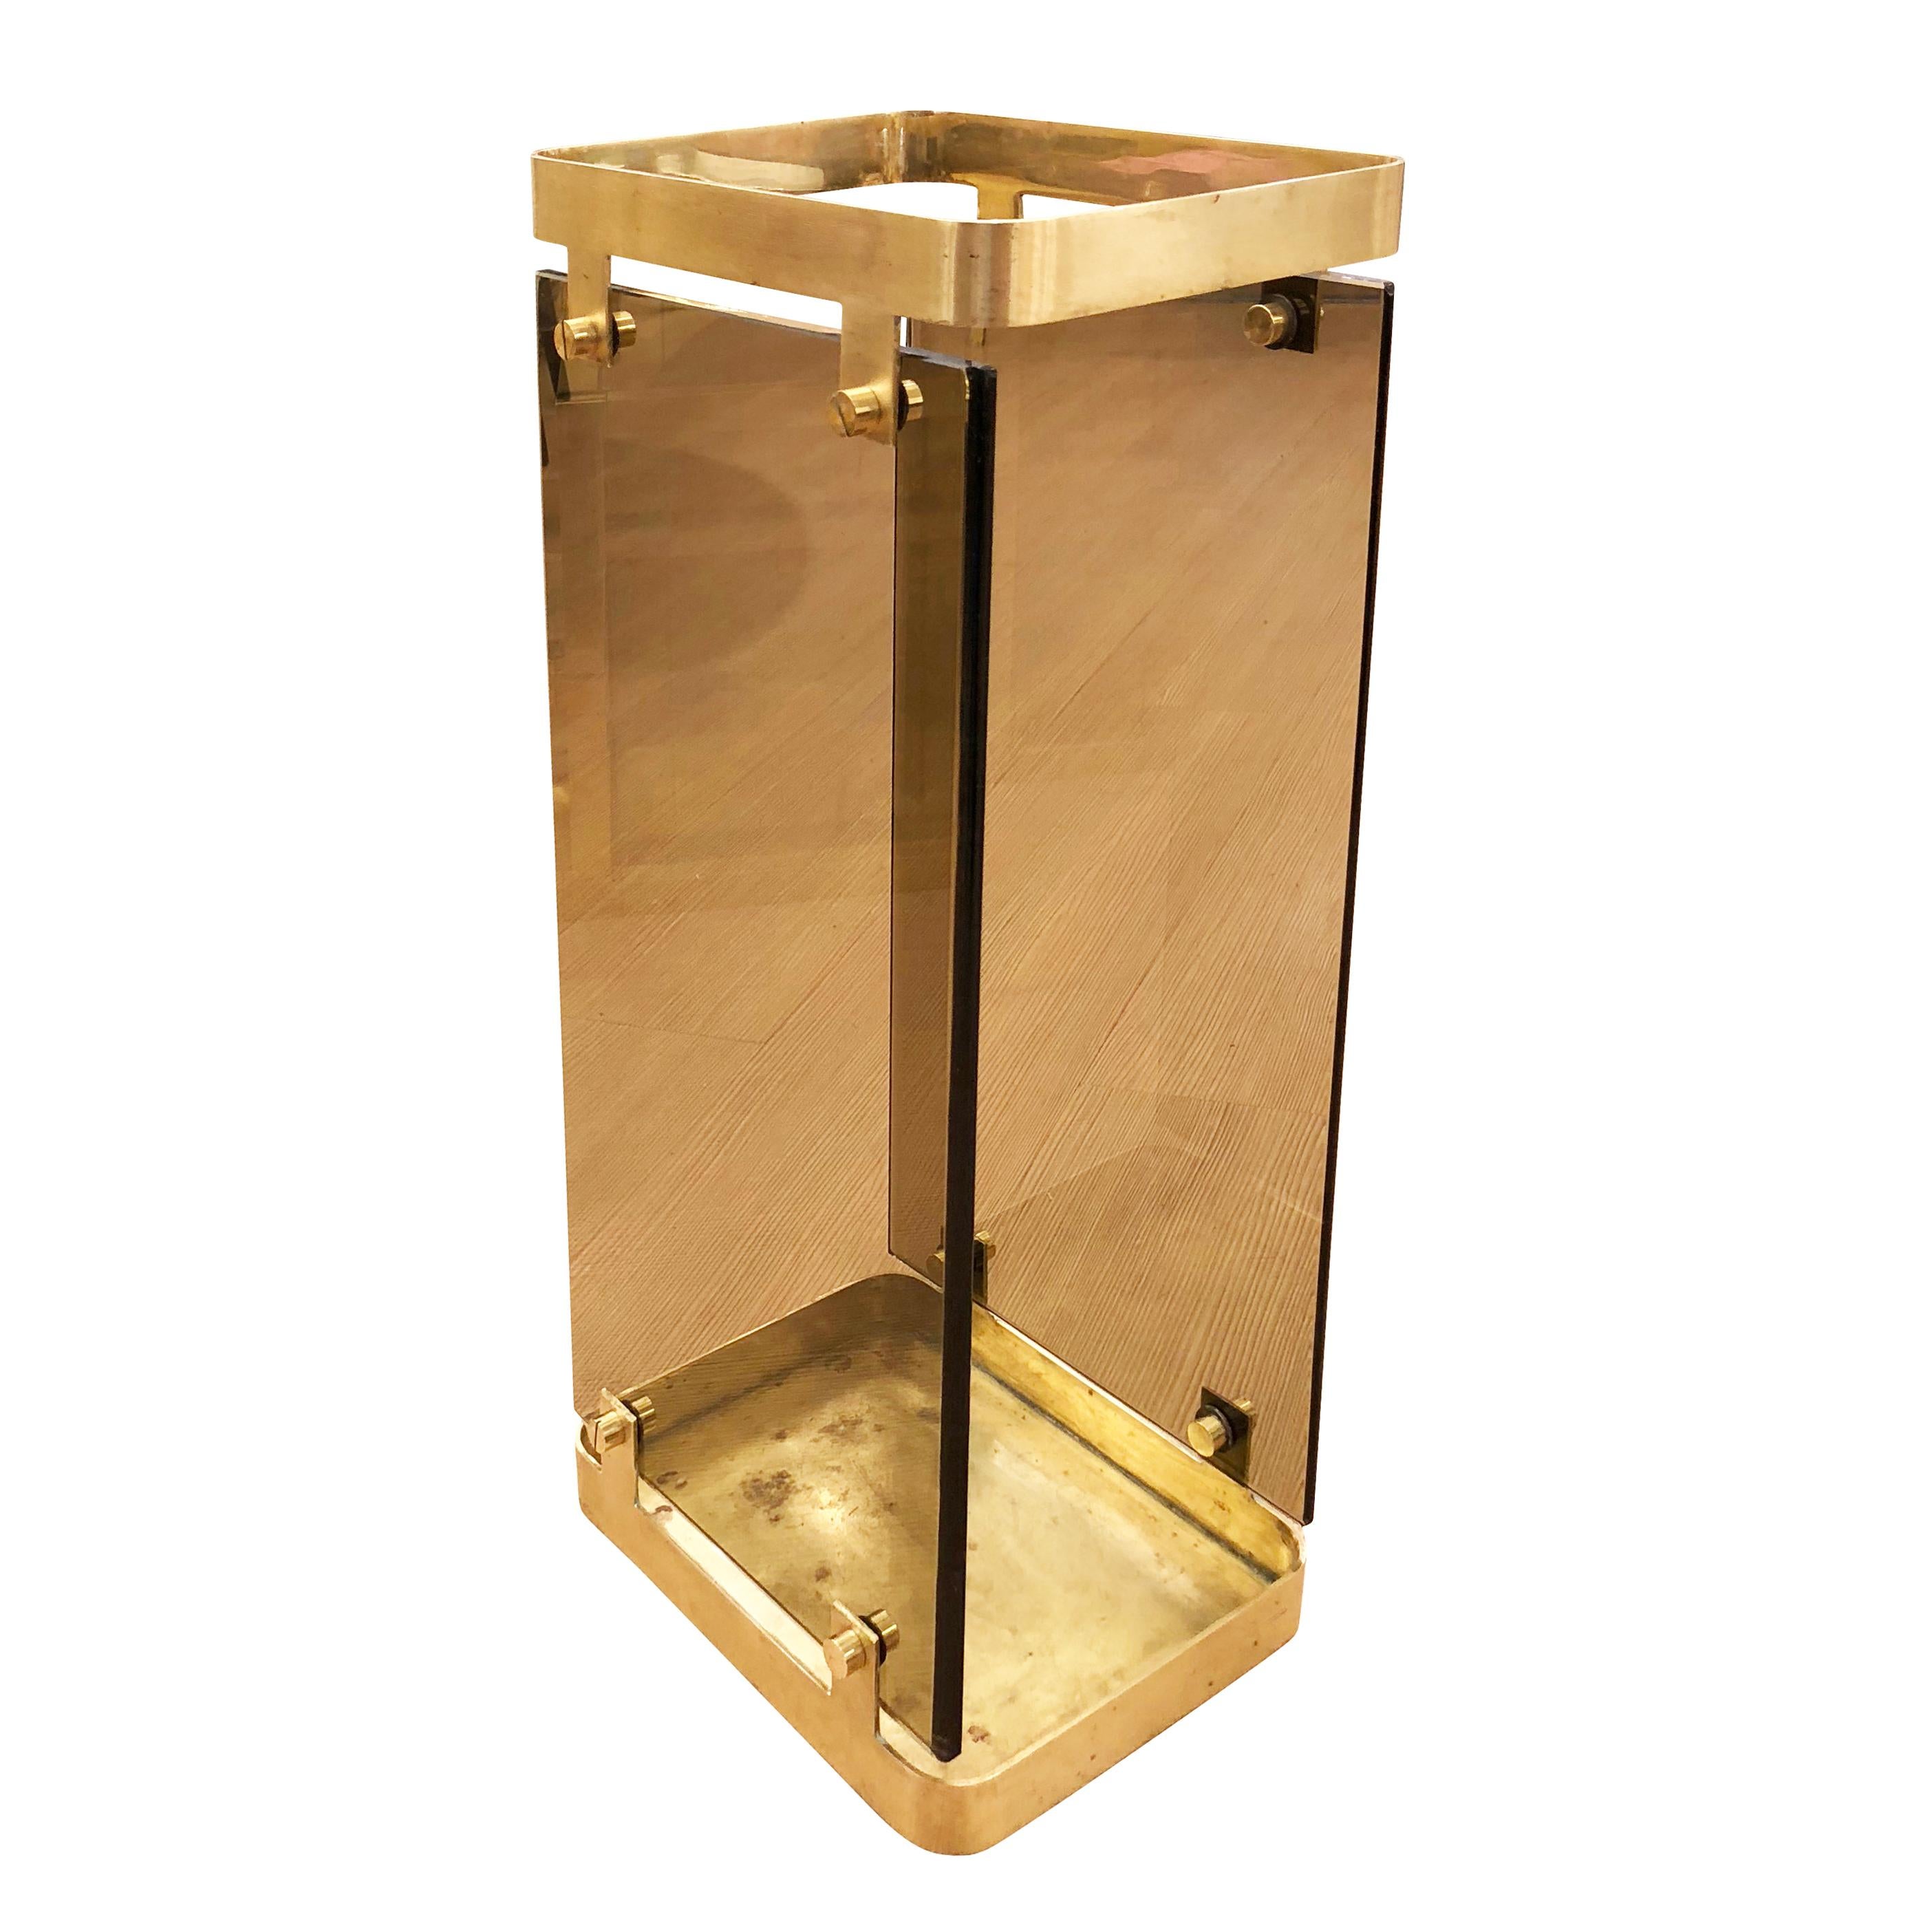 Refined 1960s Fontana Arte umbrella stand composed of two bevelled smoked glasses mounted on brushed brass frame.

Condition: Good vintage condition, wear consistent with age and use. Some oxidation to the brass. Can be fully polished upon